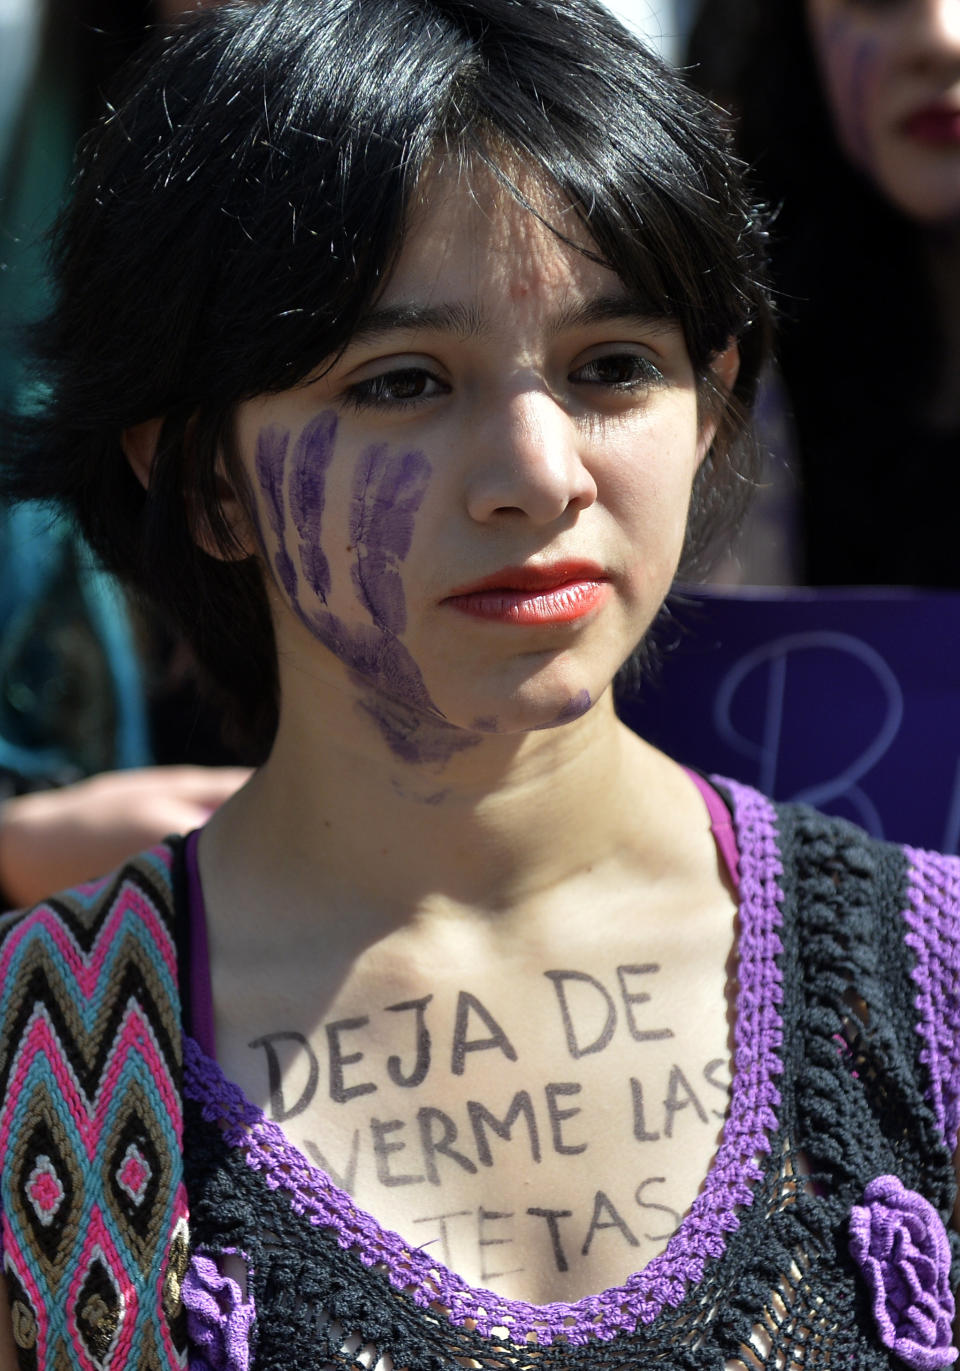 A woman in Mexico City with the sentence "Stop Looking at my Breasts" written on her chest takes part in October 19 protests.&nbsp;